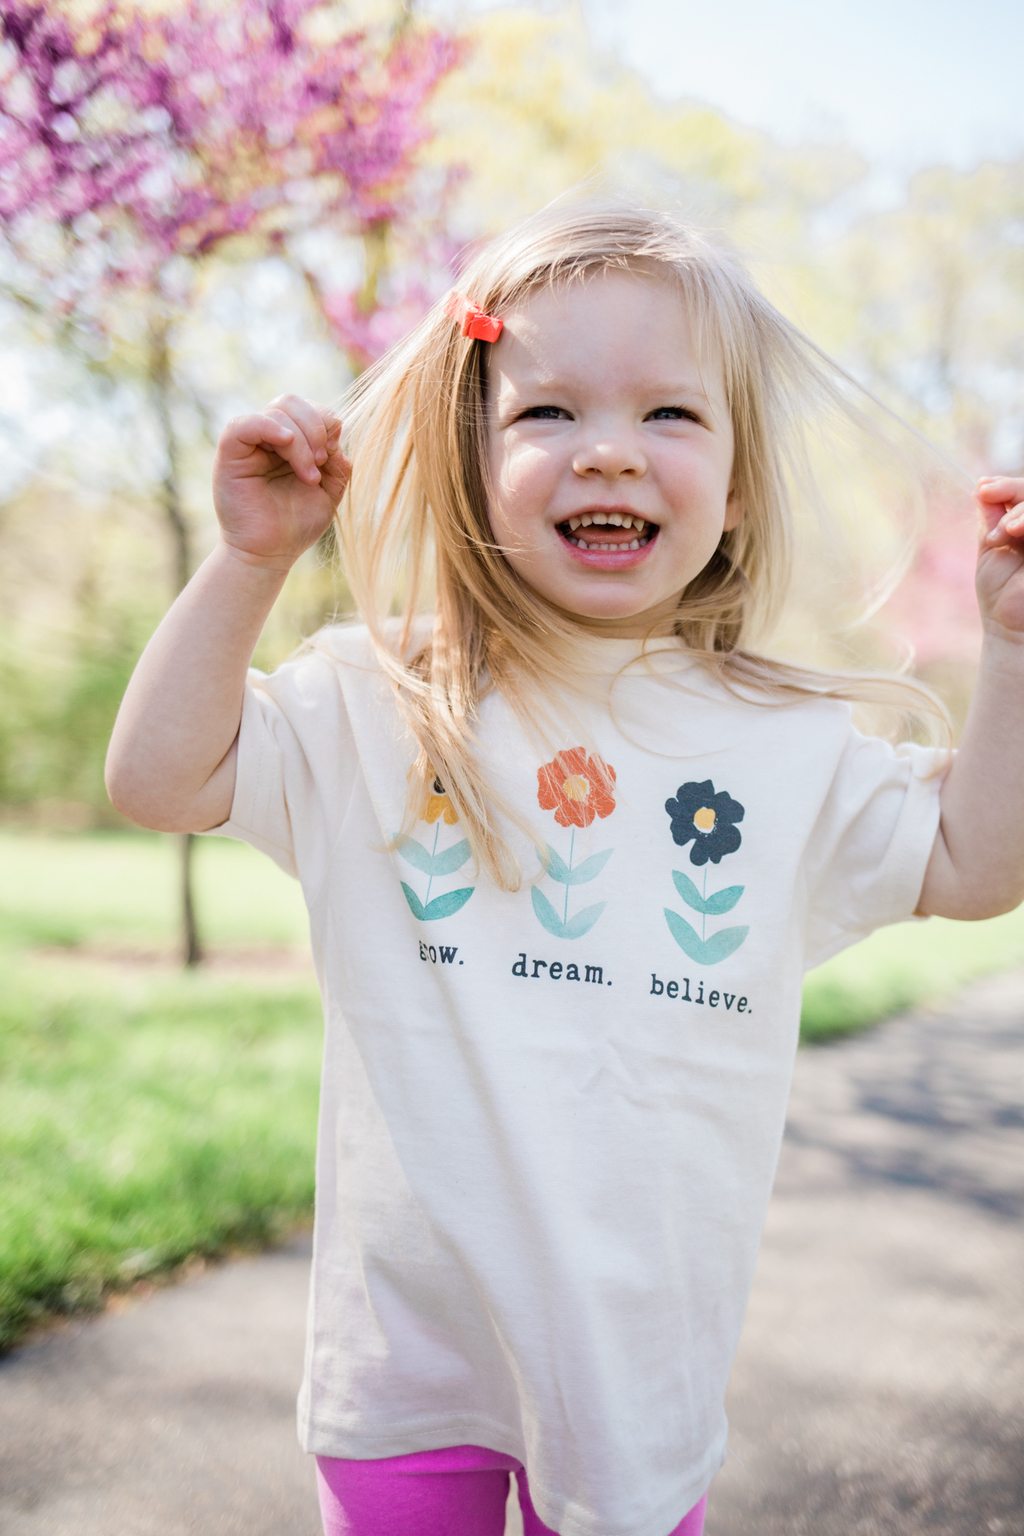 15 Awesome Kids Clothes For Summer 2021